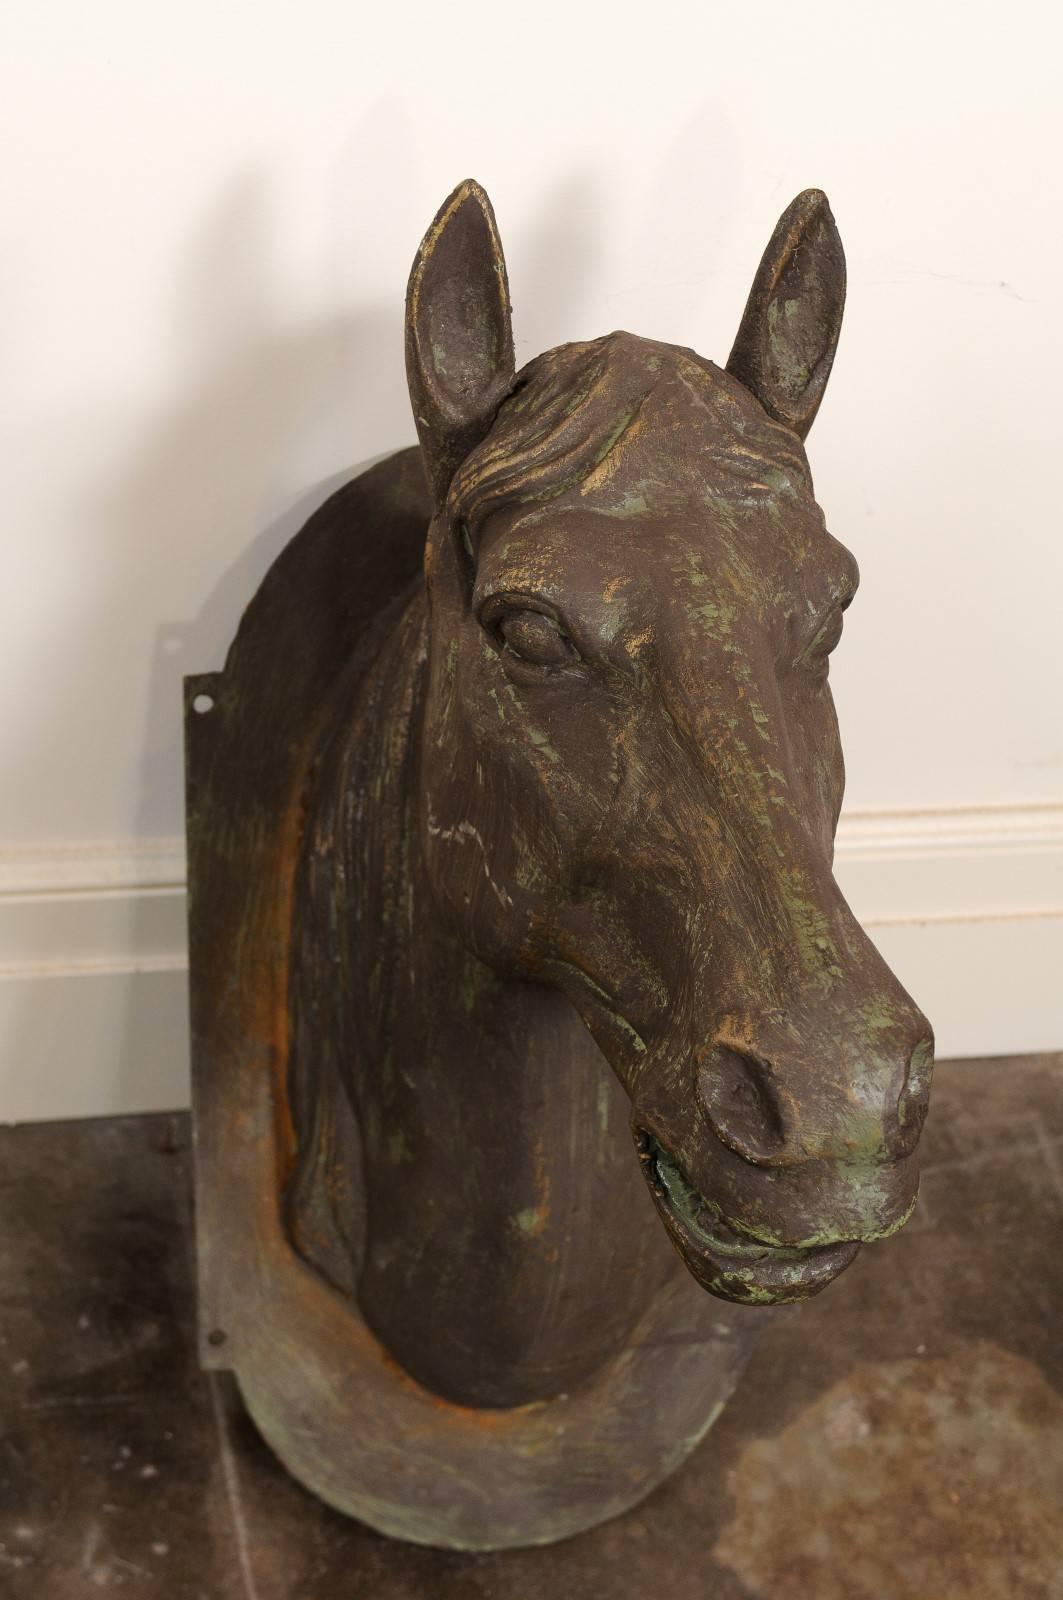 This exquisite horse head sculpture from the mid-20th century features a cast iron head mounted on an oval backplate. Very detailed, the horse features great realism with its opened mouth. Perfect to be mounted on the wall, the backplate has four